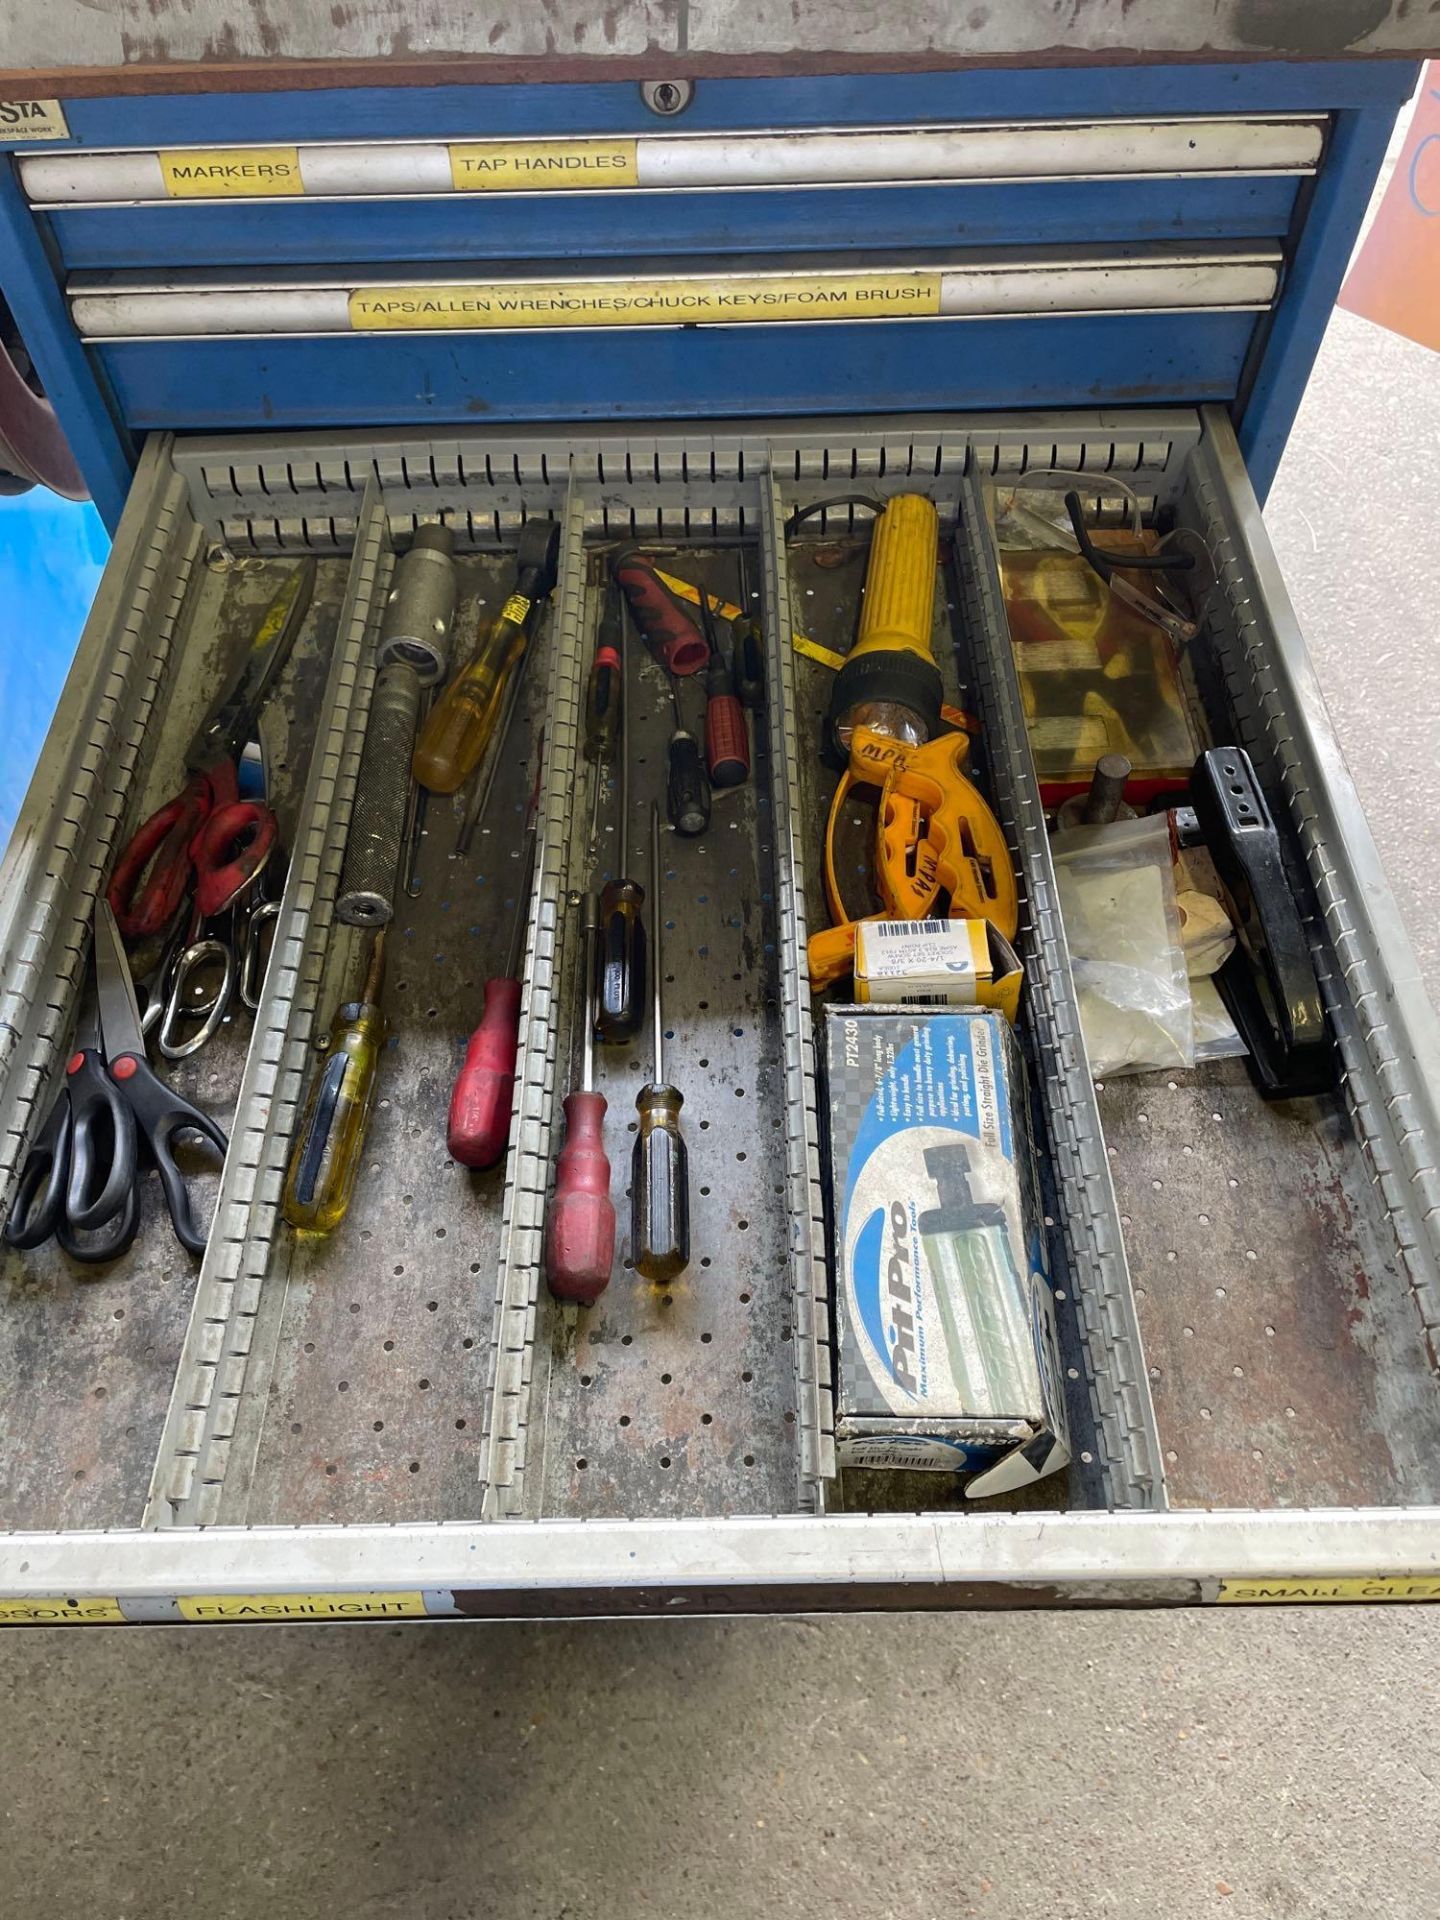 12 Drawer Work Table with Air Hose Reel on Base, with miscellaneous hand tools, taps, drill bits, Al - Image 22 of 32